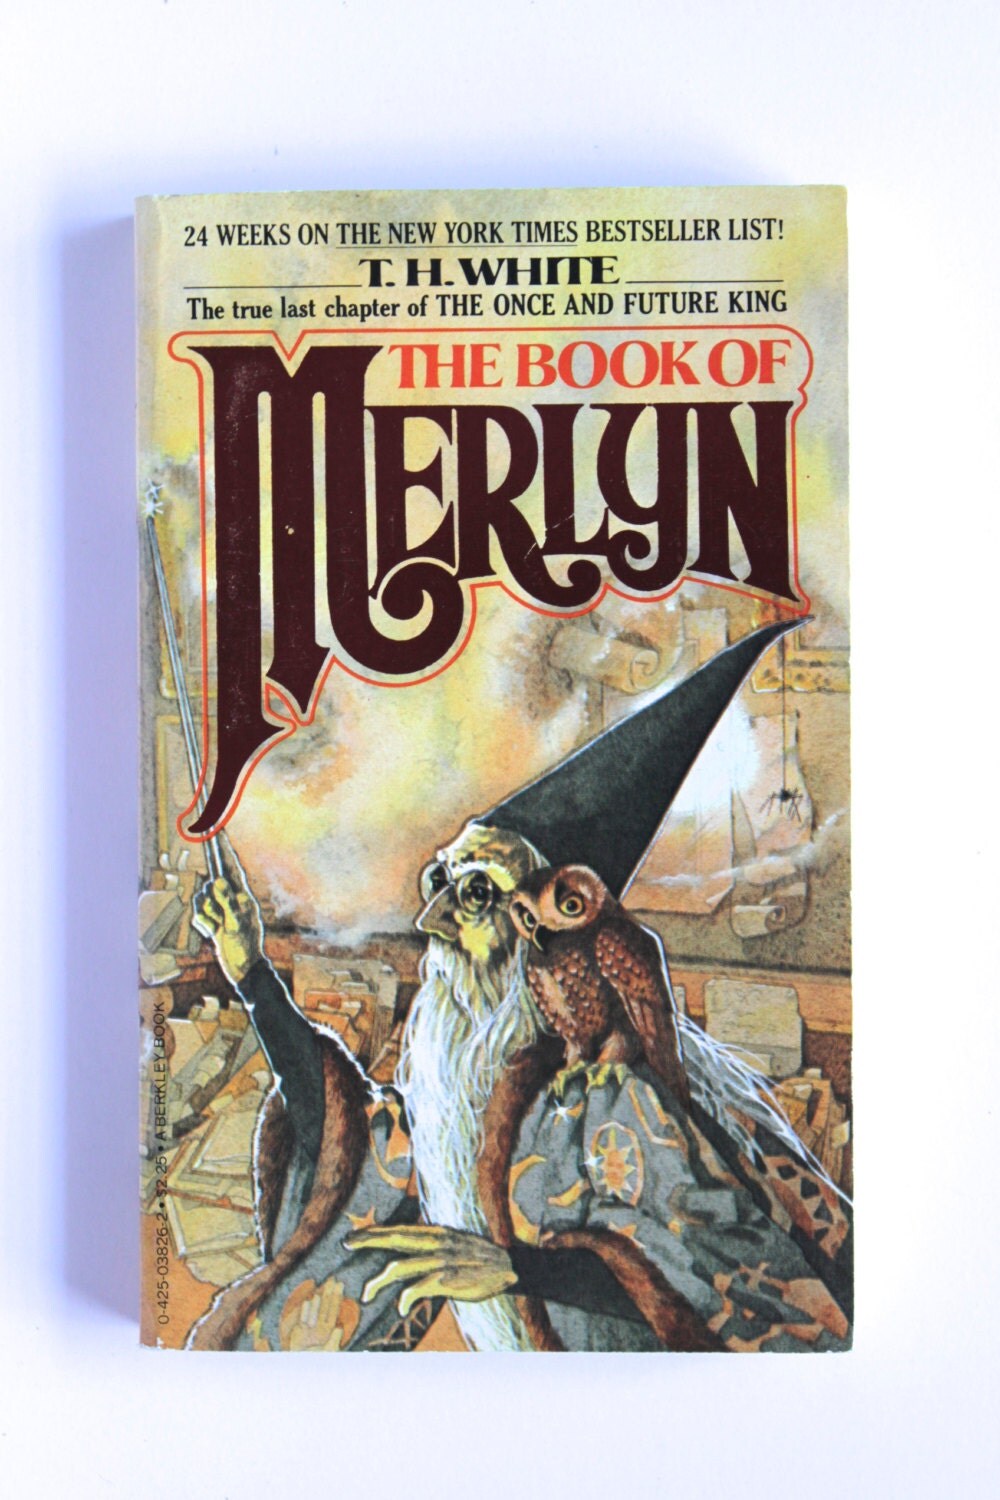 Book of Merlin by T.H. White 1970s Vintage Fantasy Paperback